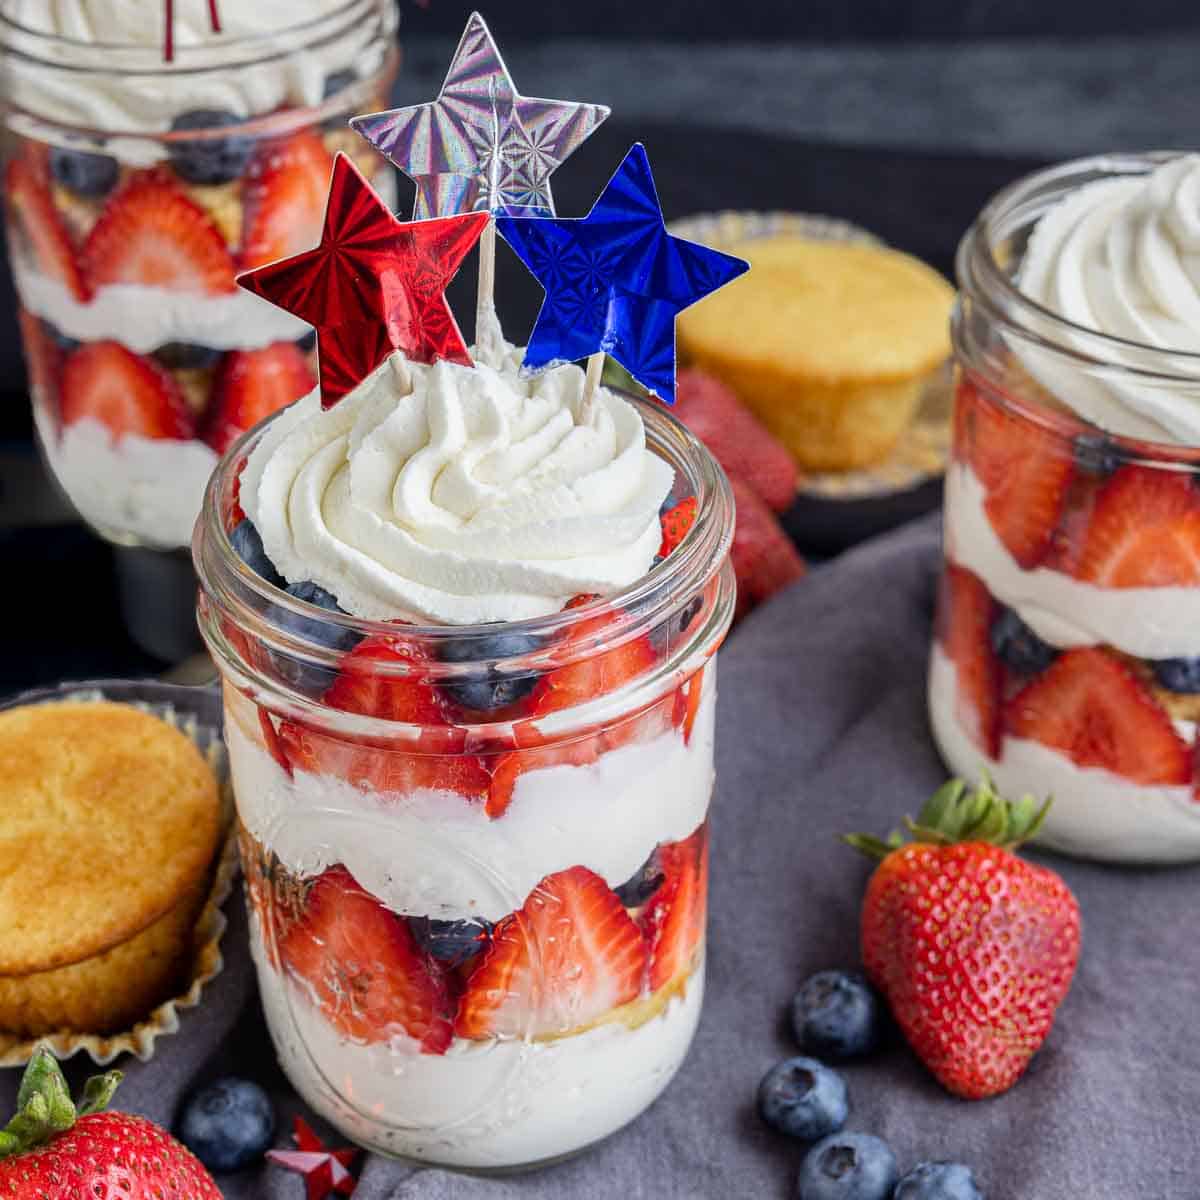 cupcakes in a jar with fresh fruit and whipped cream